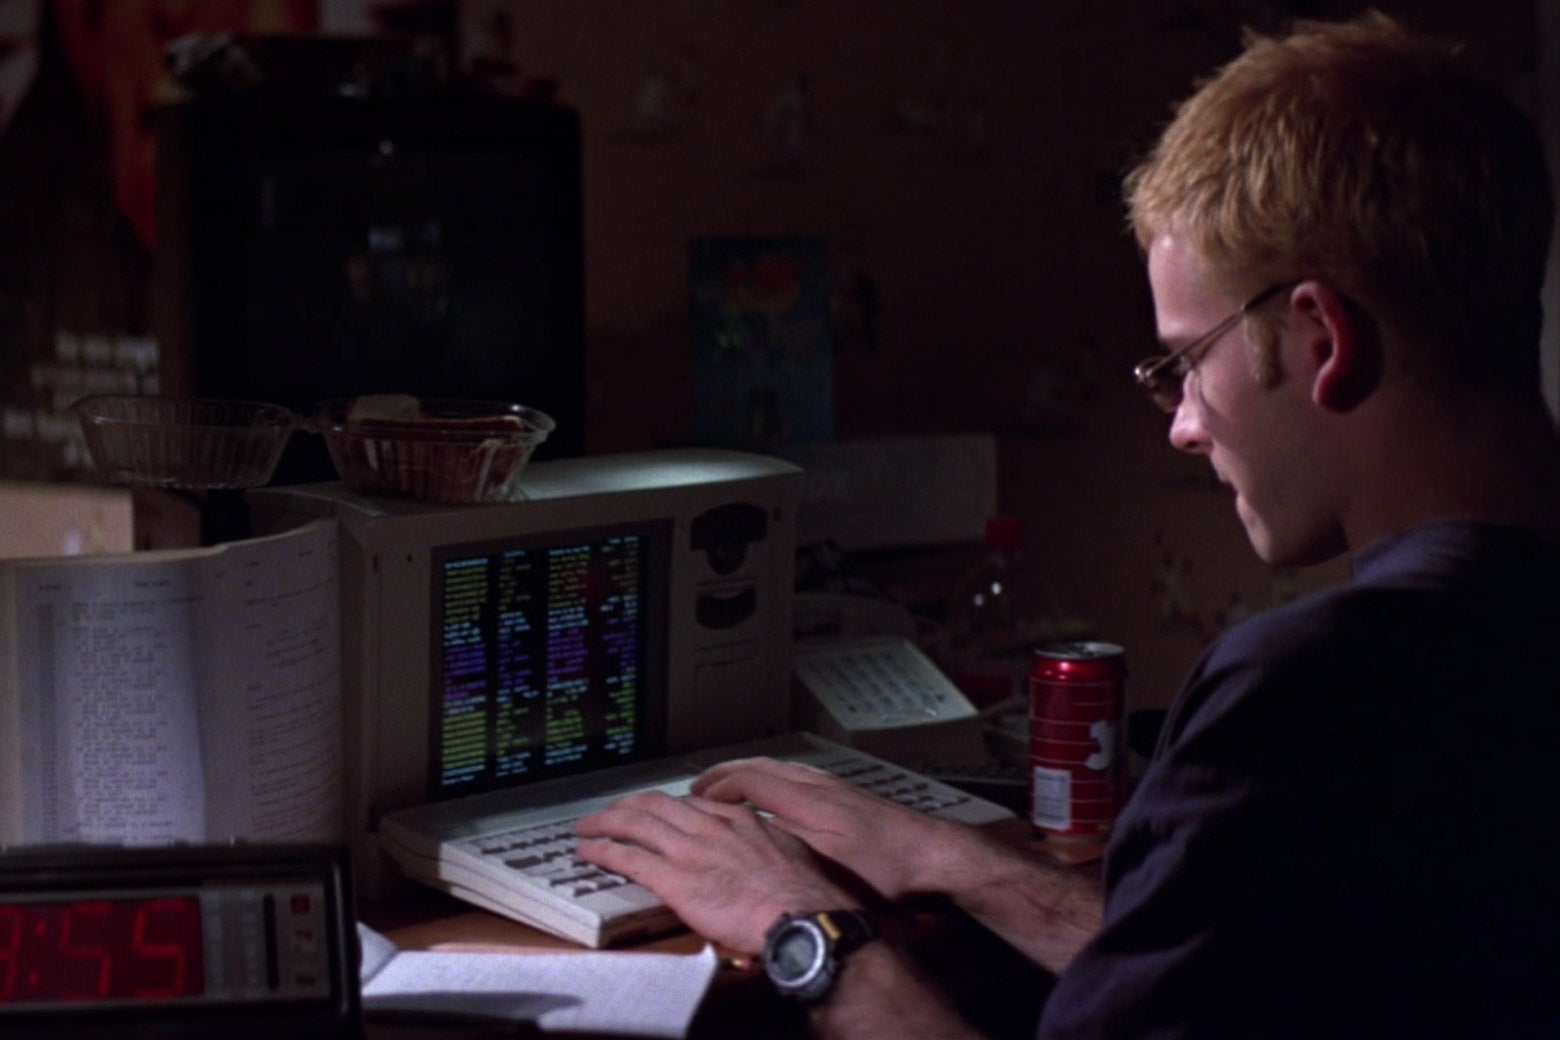 Screengrab from Hackers of someone writing code on a computer.